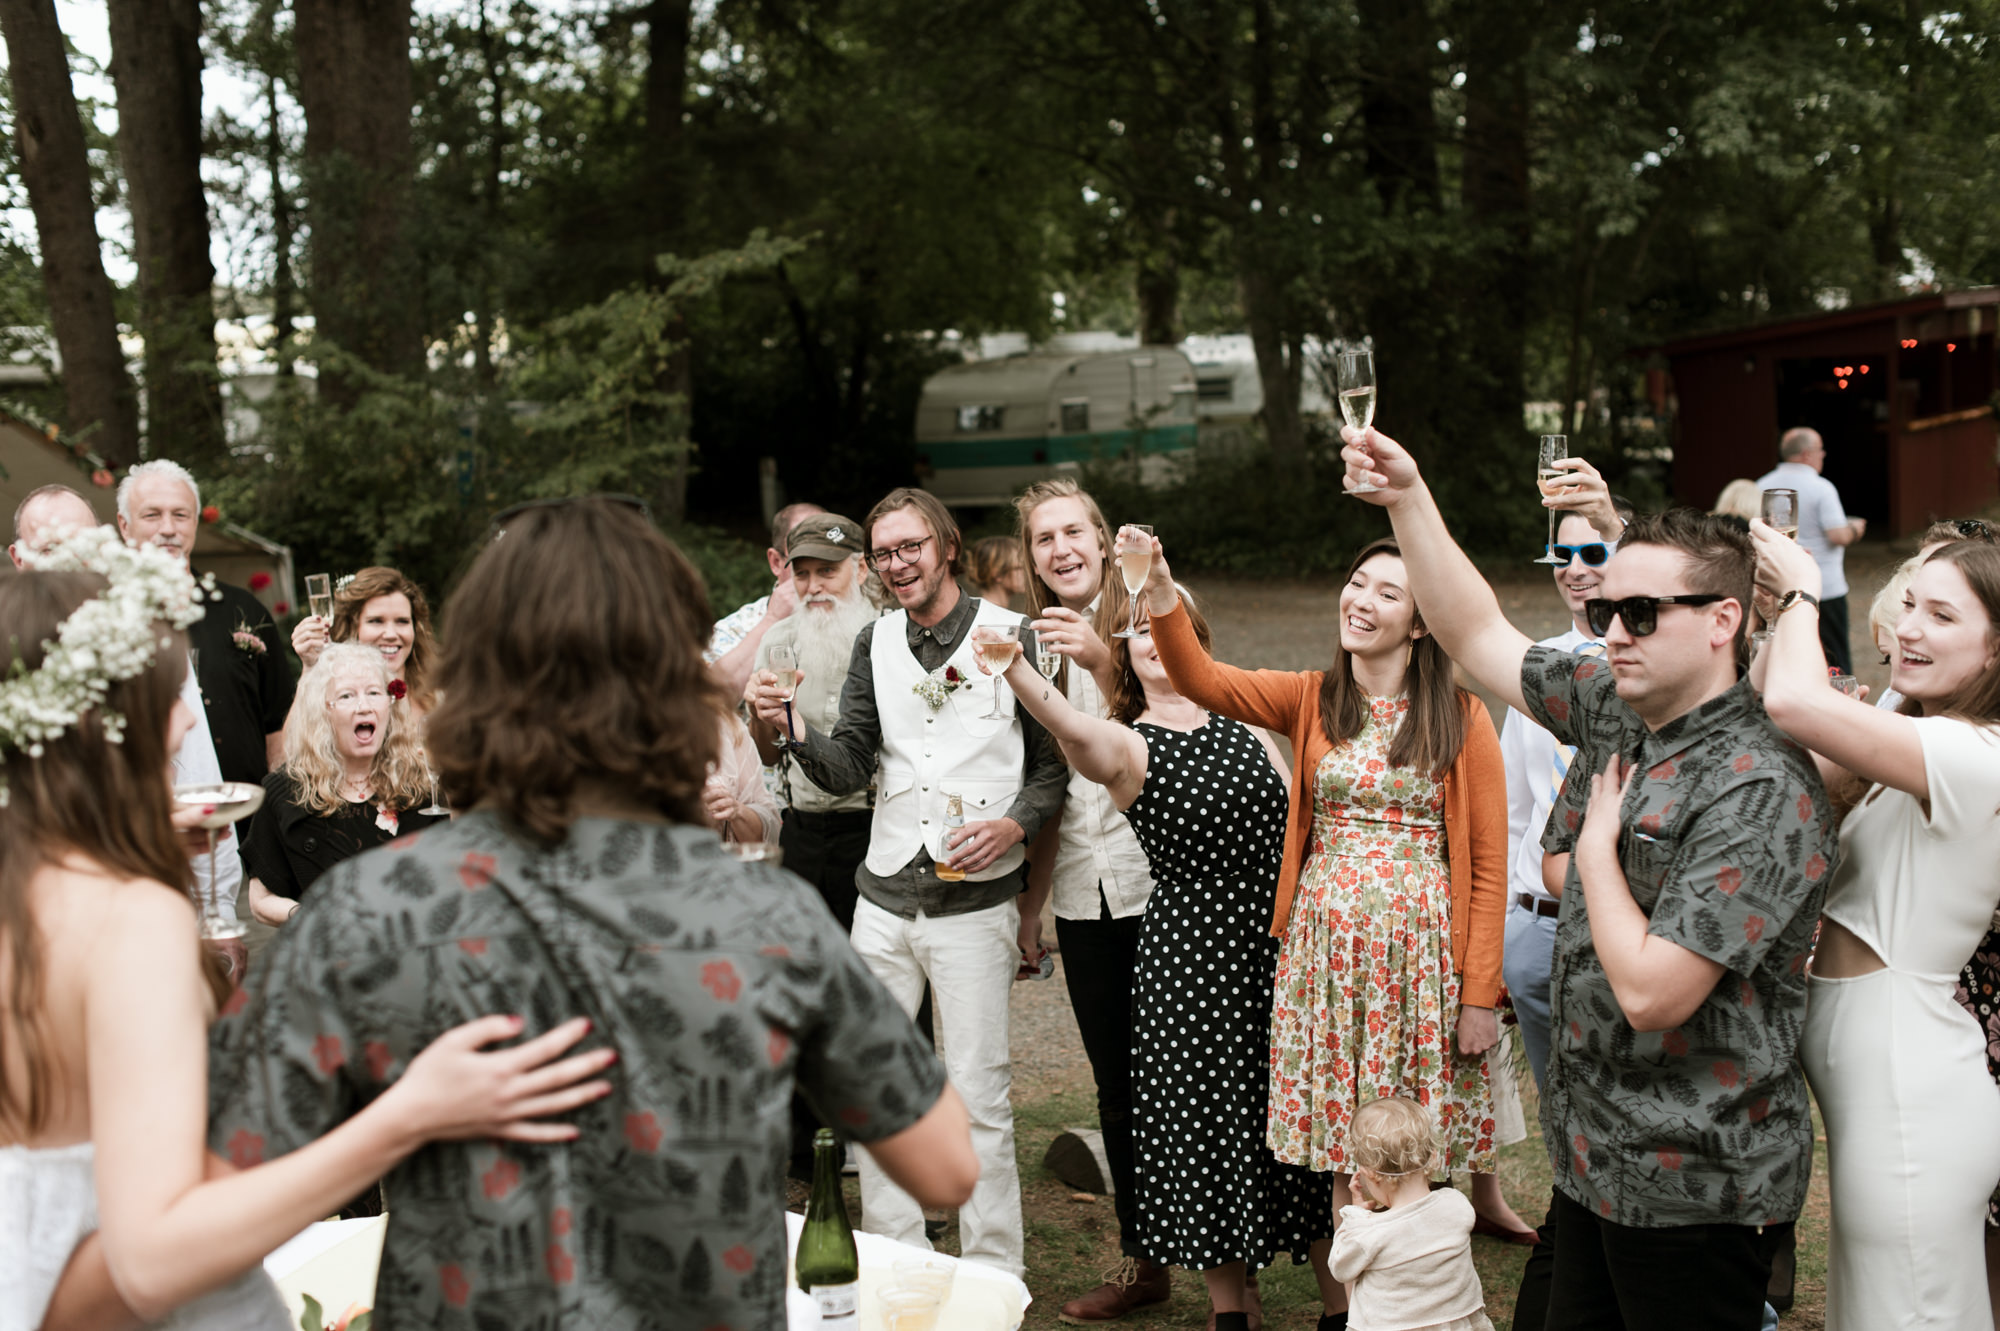 Wedding guest toasting the bride and groom at their vintage Pacific Northwest wedding. West Coast Wedding Photographer Briana Morrison